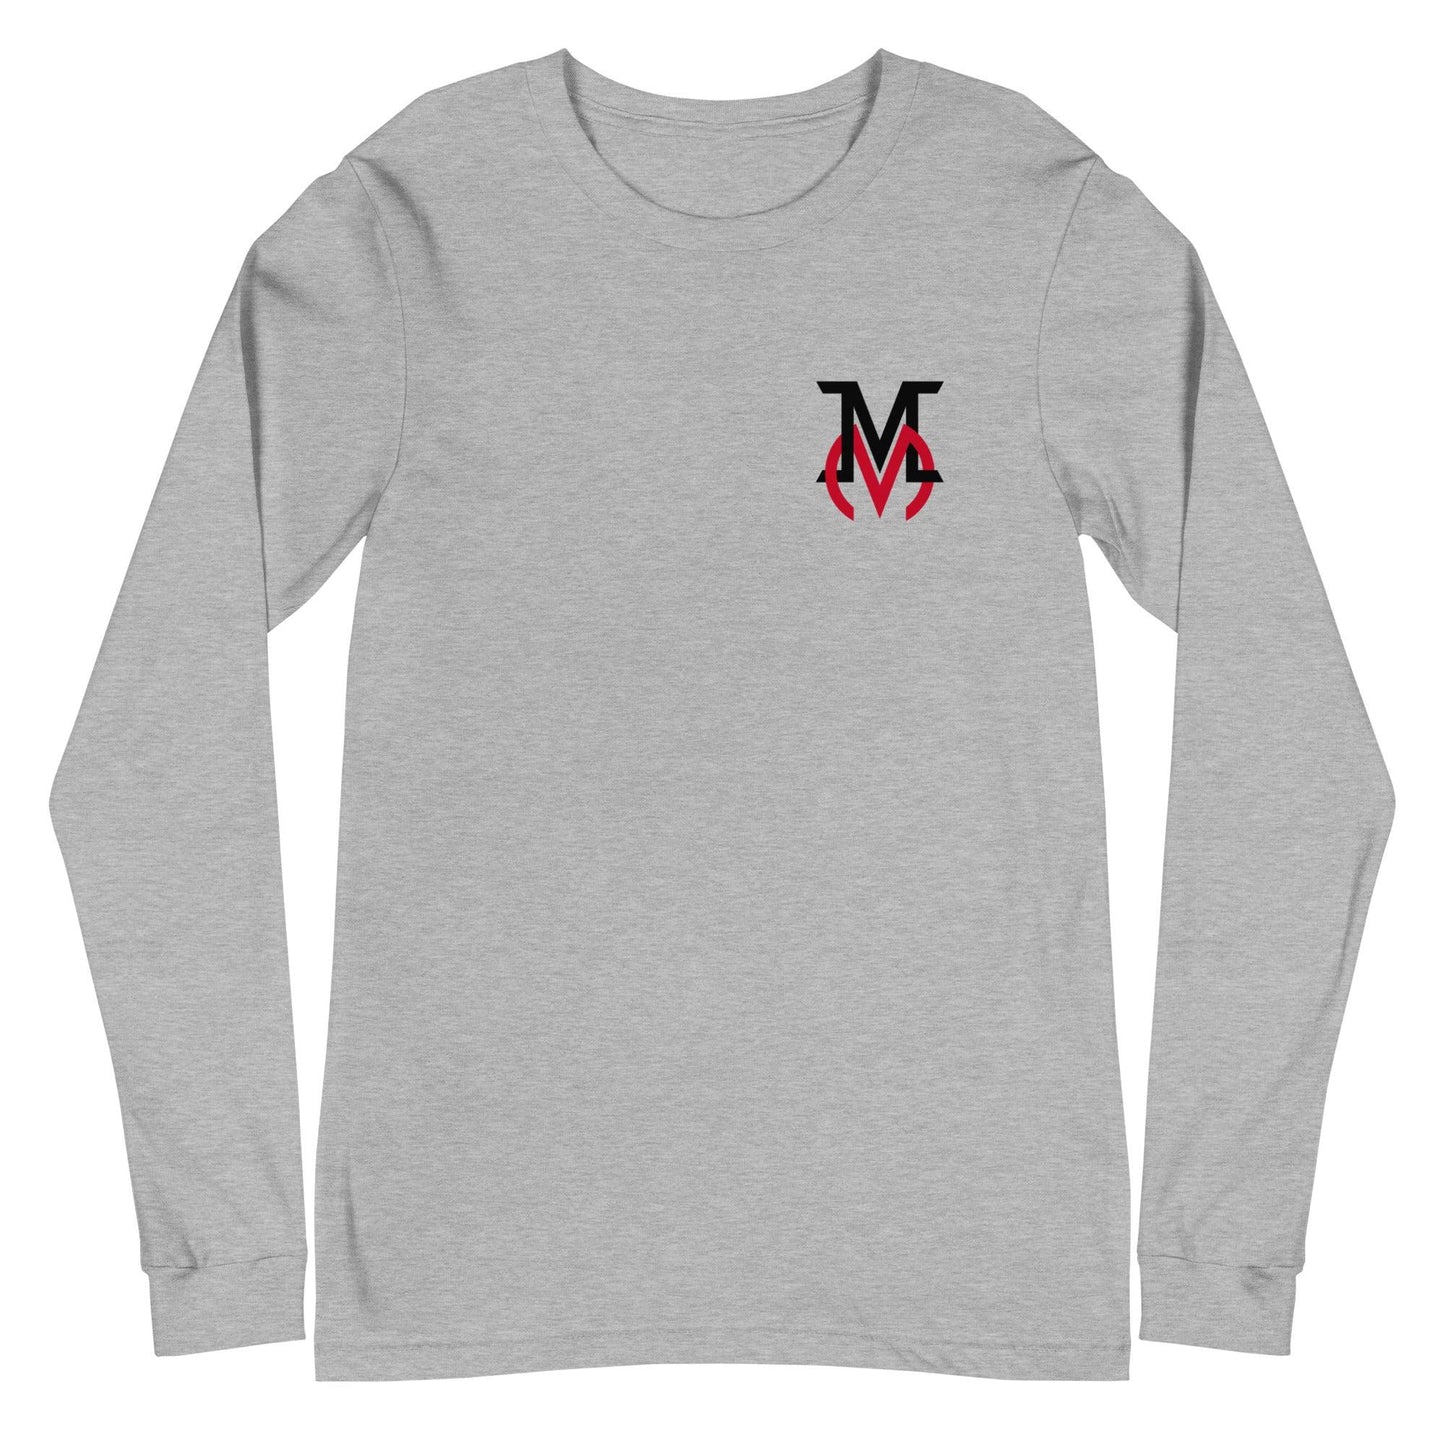 Mike Minor "Essentials" Long Sleeve Tee - Fan Arch